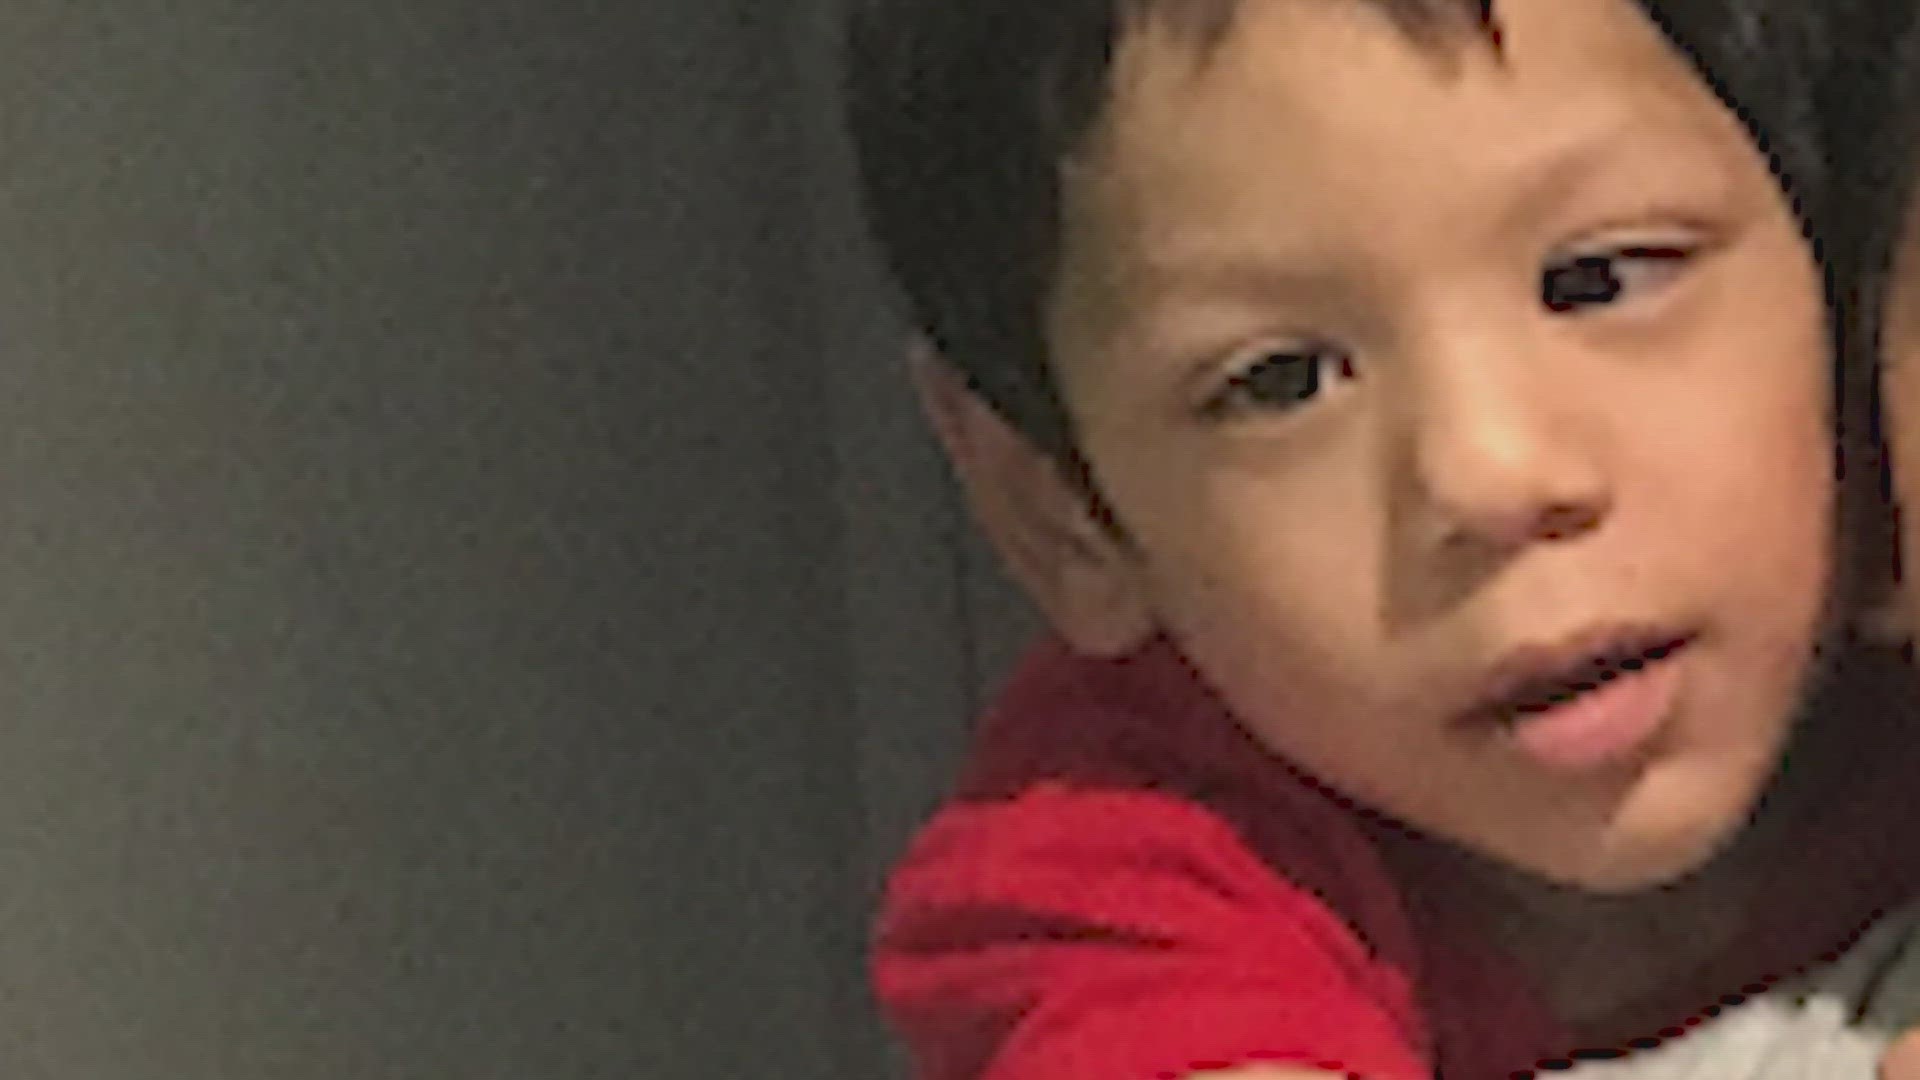 Police have issued an Endangered Missing Alert for a 6-year-old boy out of Everman, which is located about 12 miles south of Fort Worth.